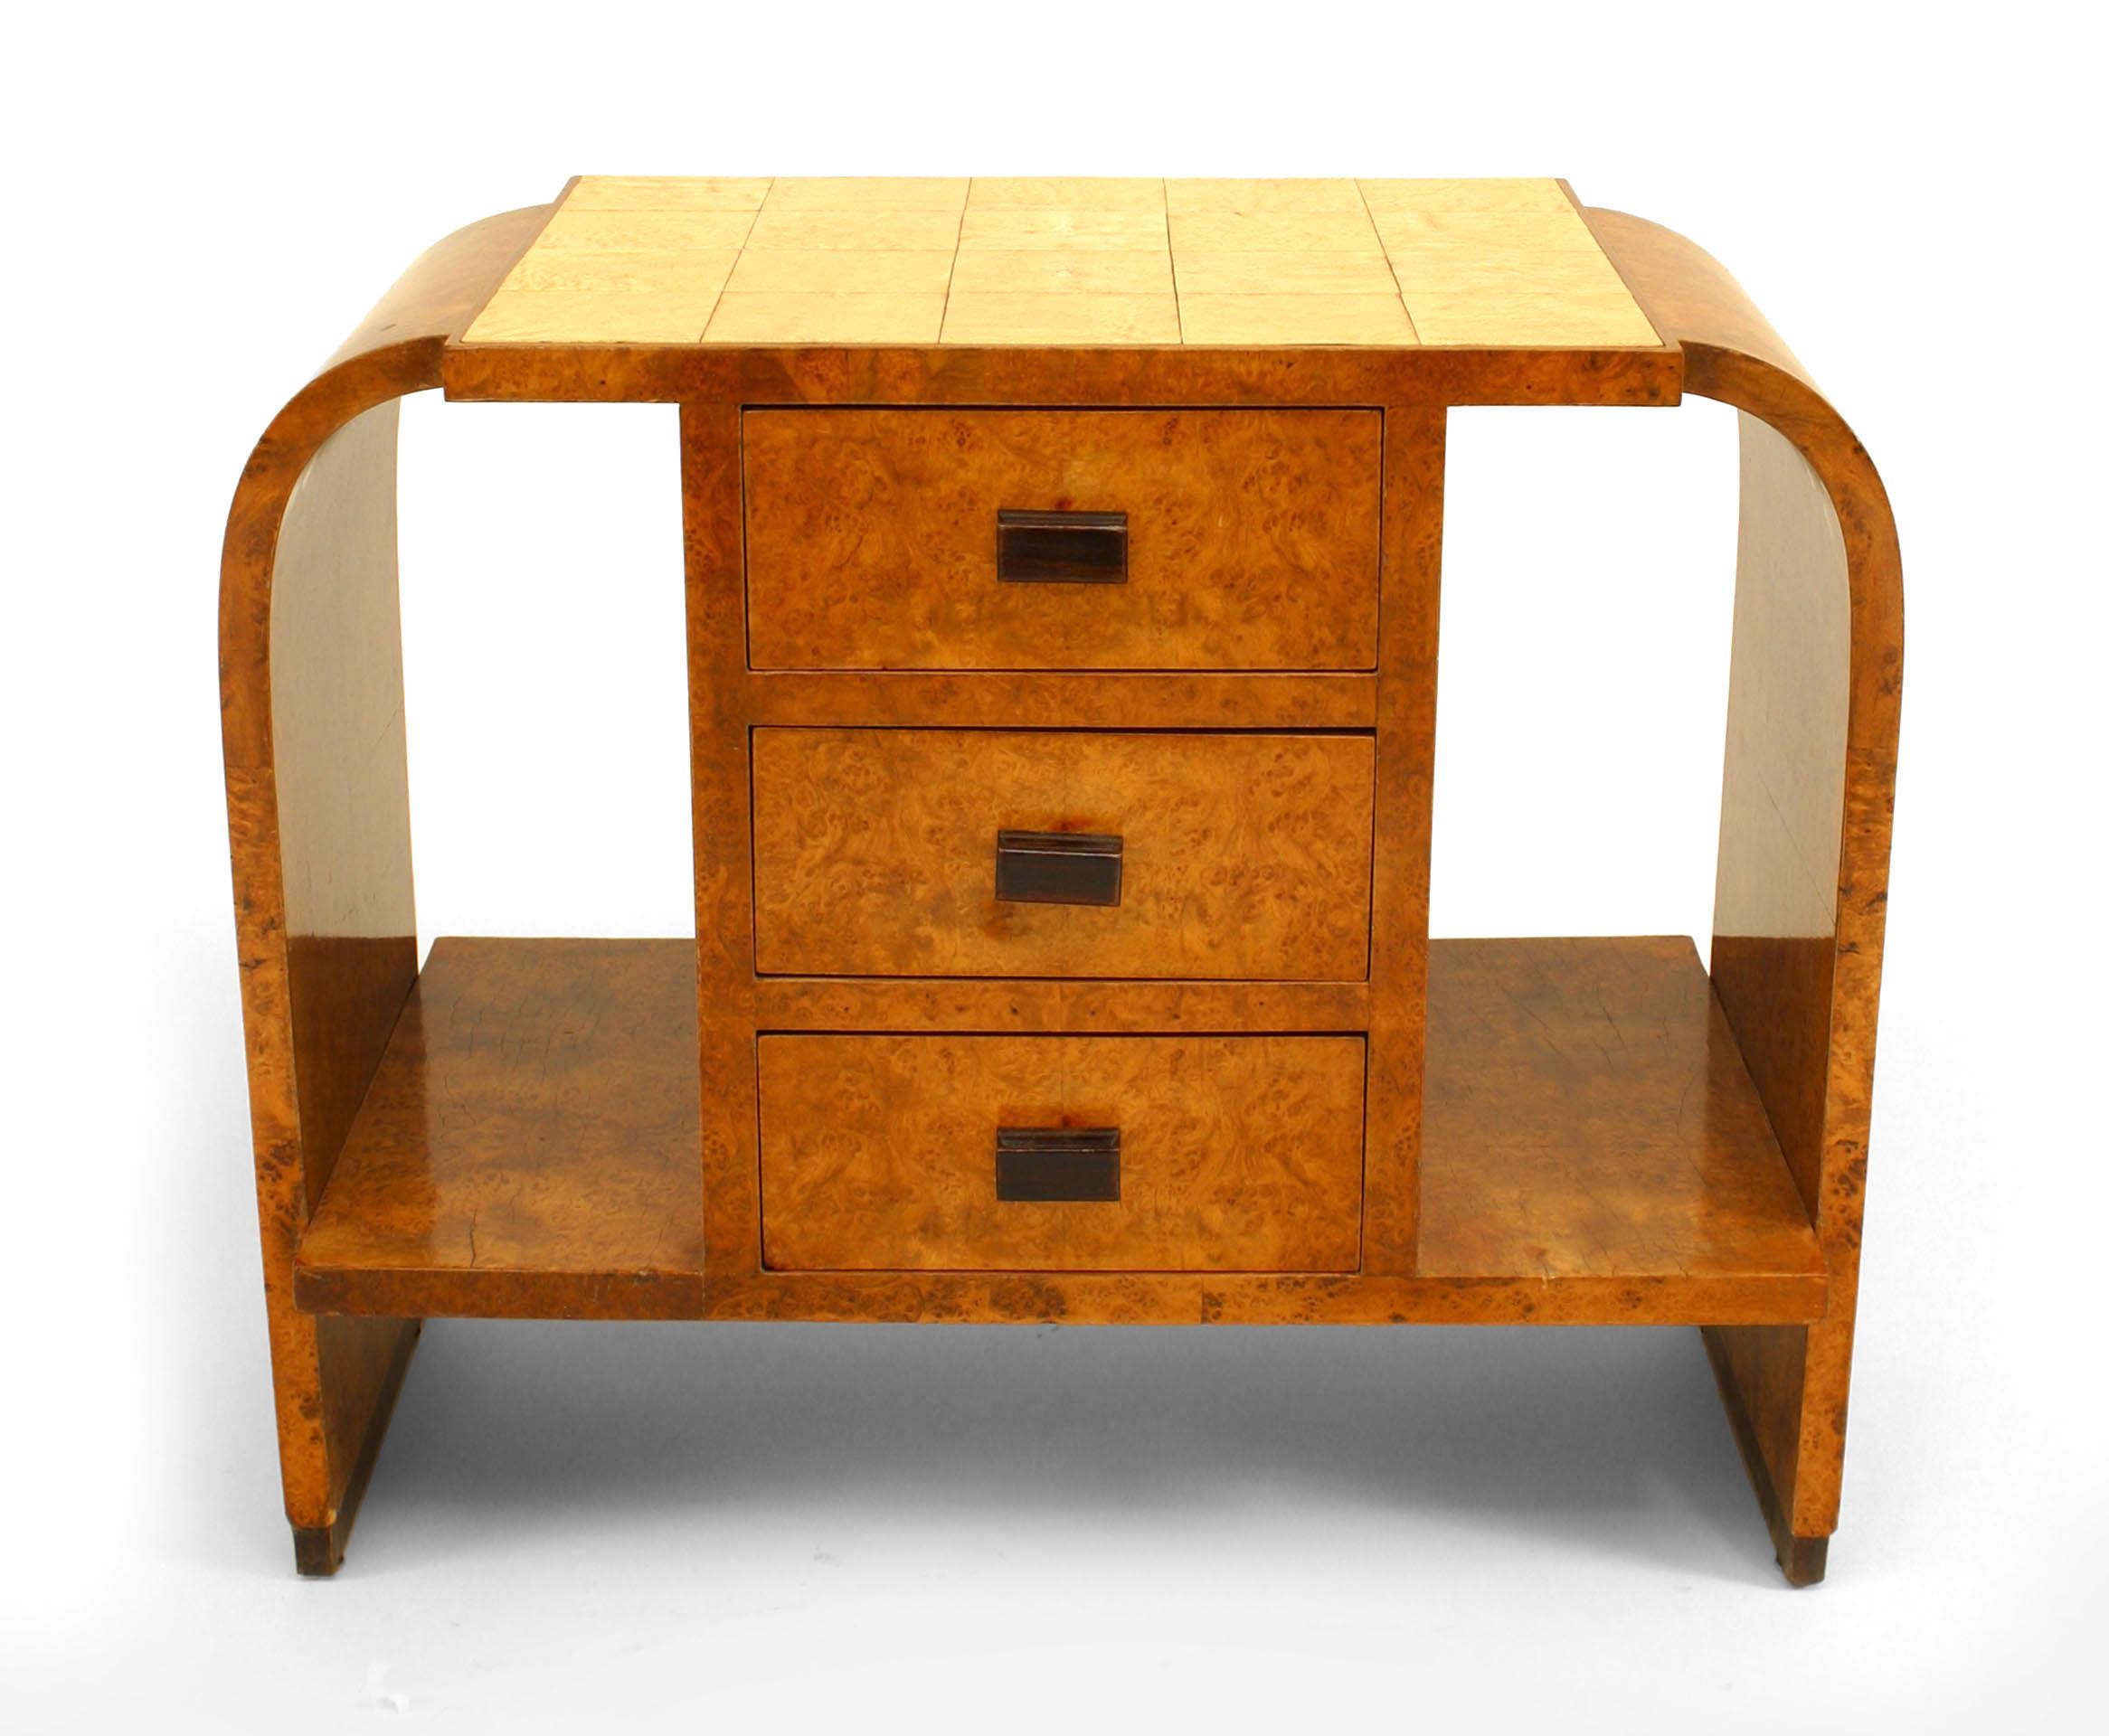 French Art Deco burl maple end table with 3 drawers with walnut handles centering 2 open shelves with a shagreen top.
